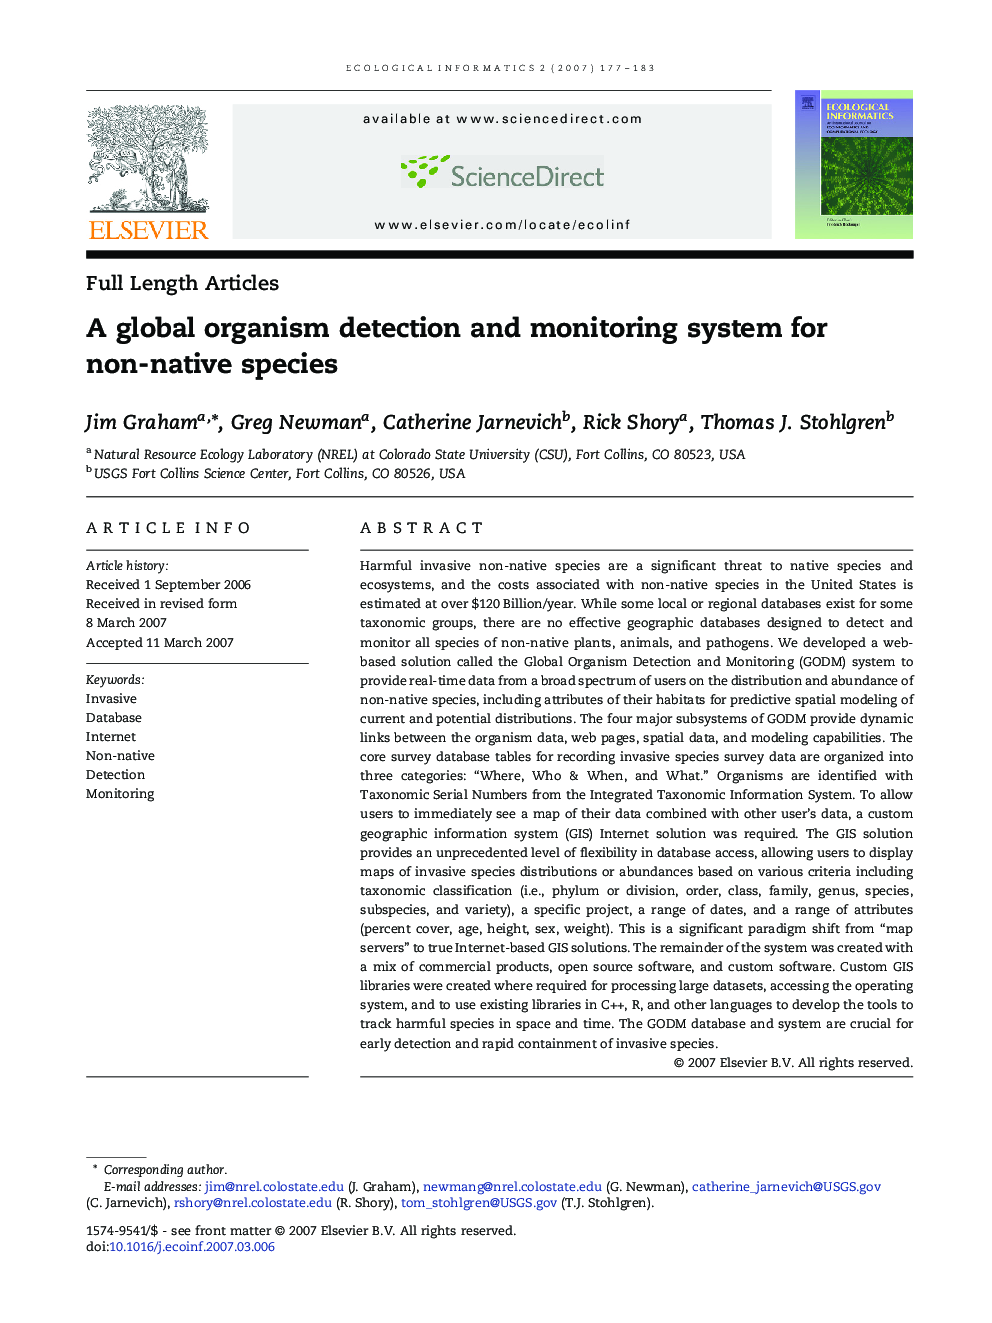 A global organism detection and monitoring system for non-native species